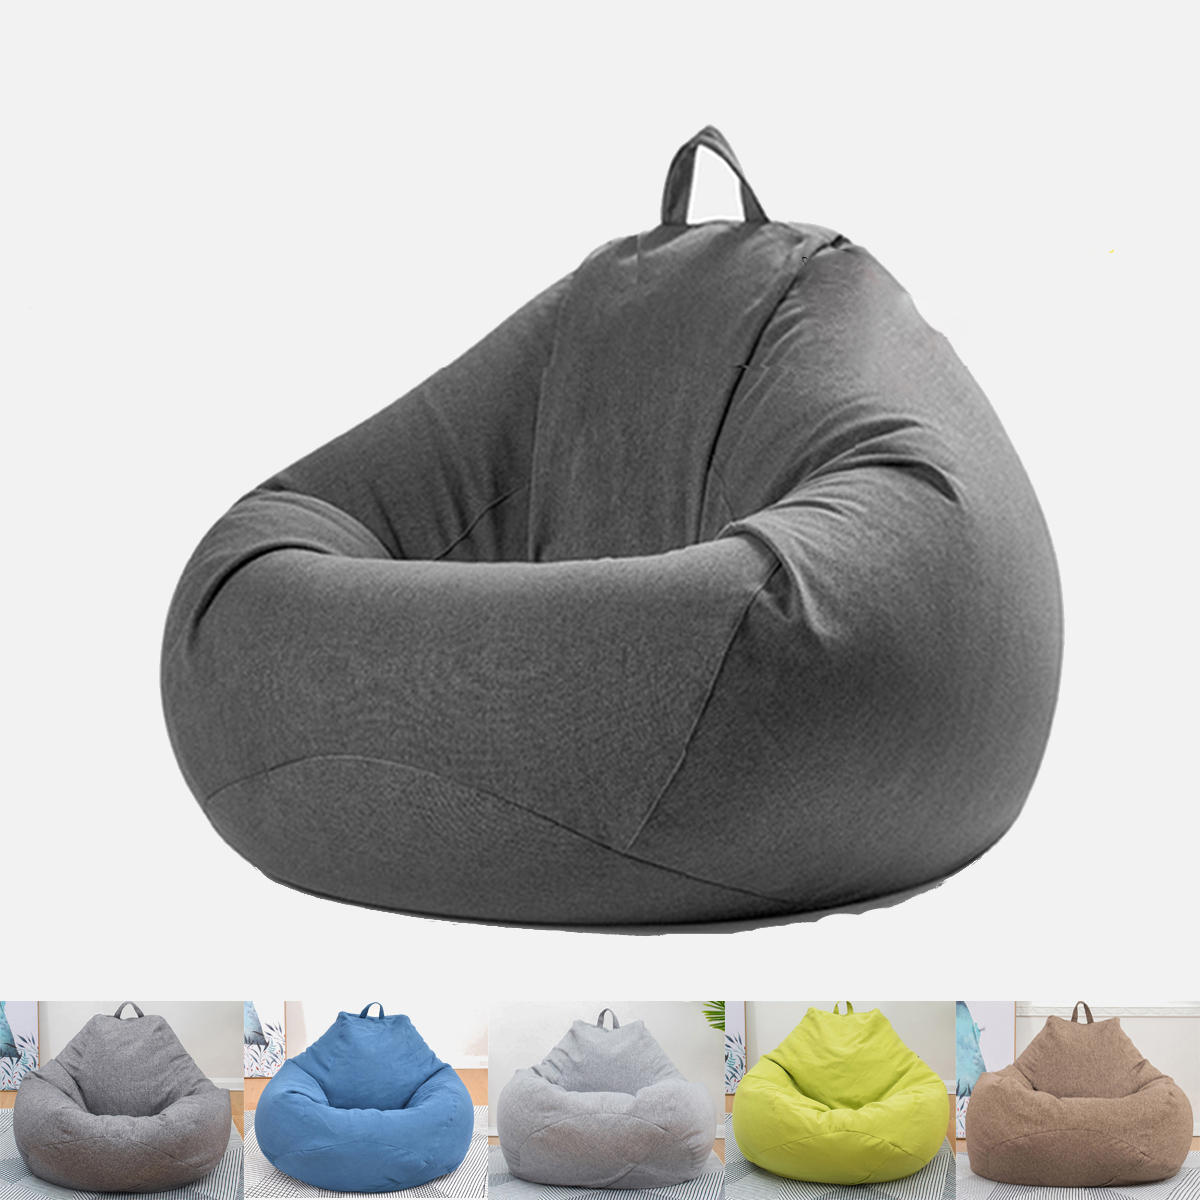 Extra Large Bean Bag Chair Lazy Sofa, Extra Large Bean Bag Chair Cover